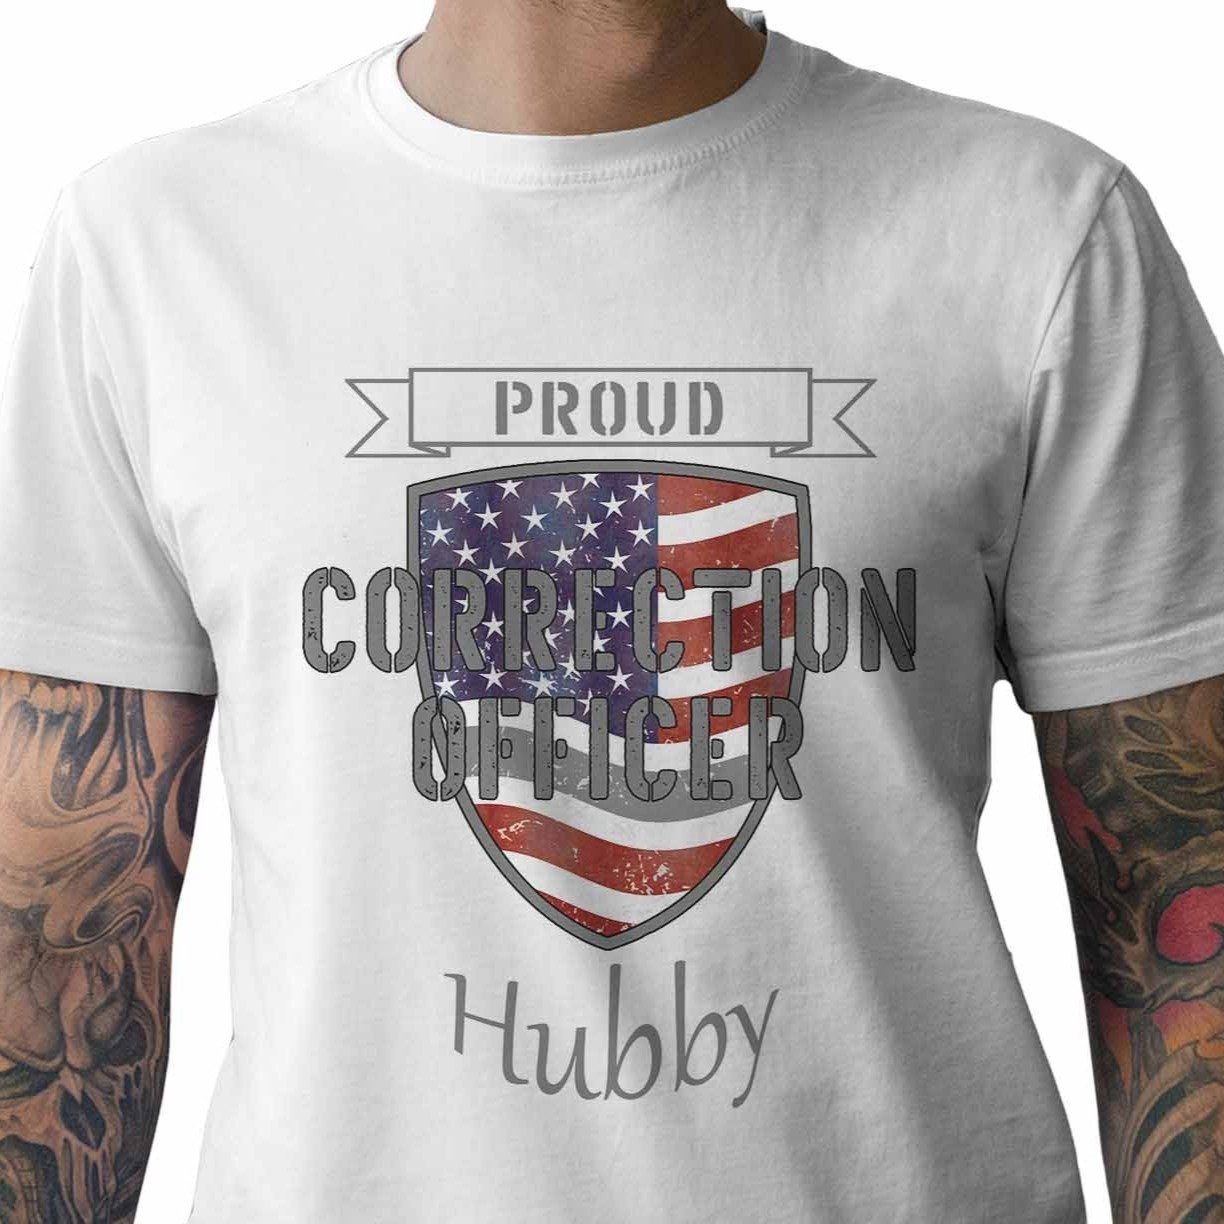 Proud Correction Officer Hubby - My Custom Tee Party